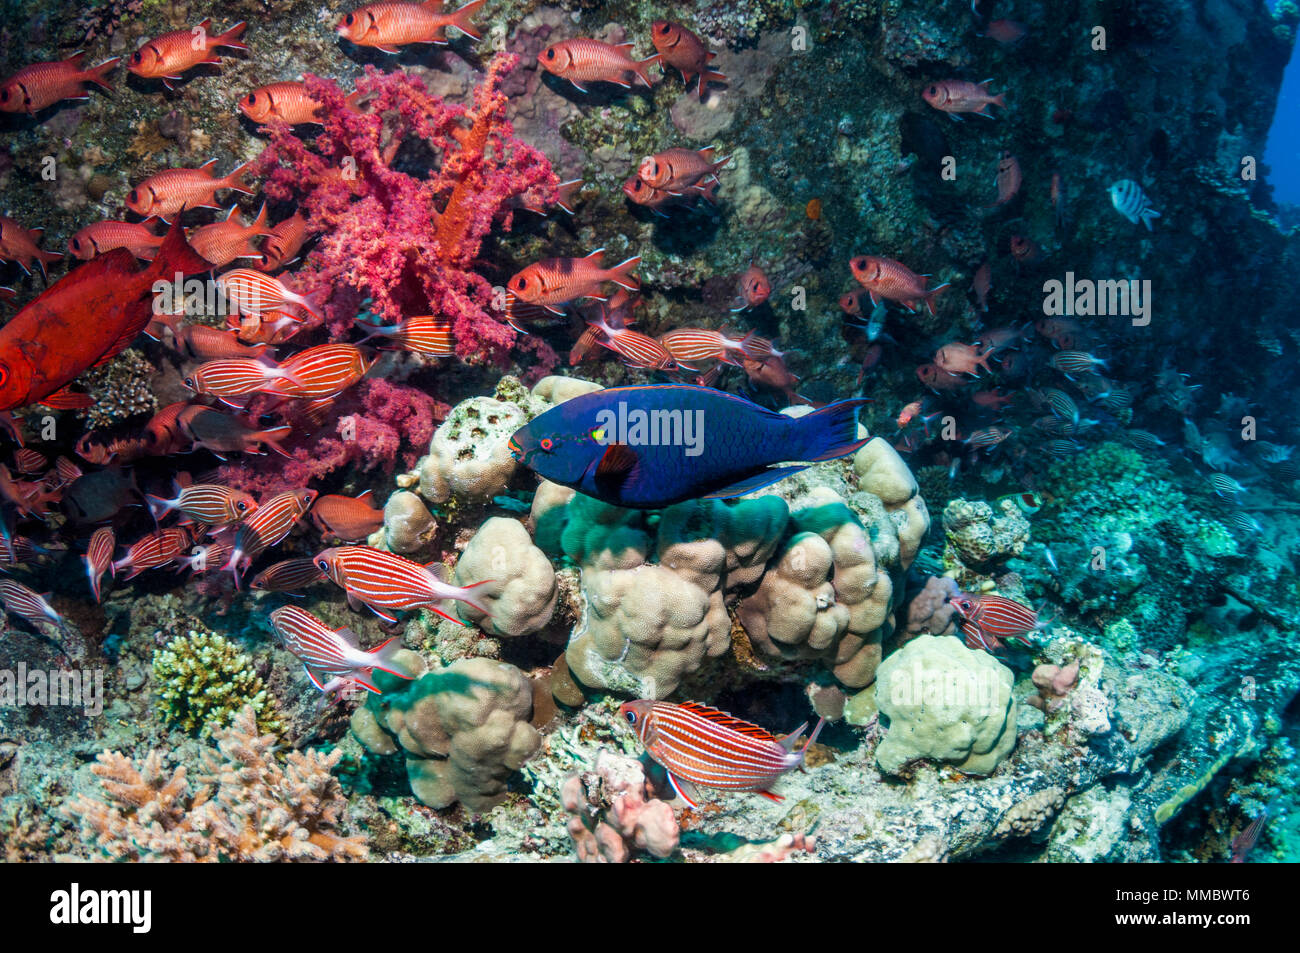 Swathy or Dusky parrotfish [Scarus niger] swimming past Soldier and Squirrelfish.  Egypt, Red Sea. Stock Photo